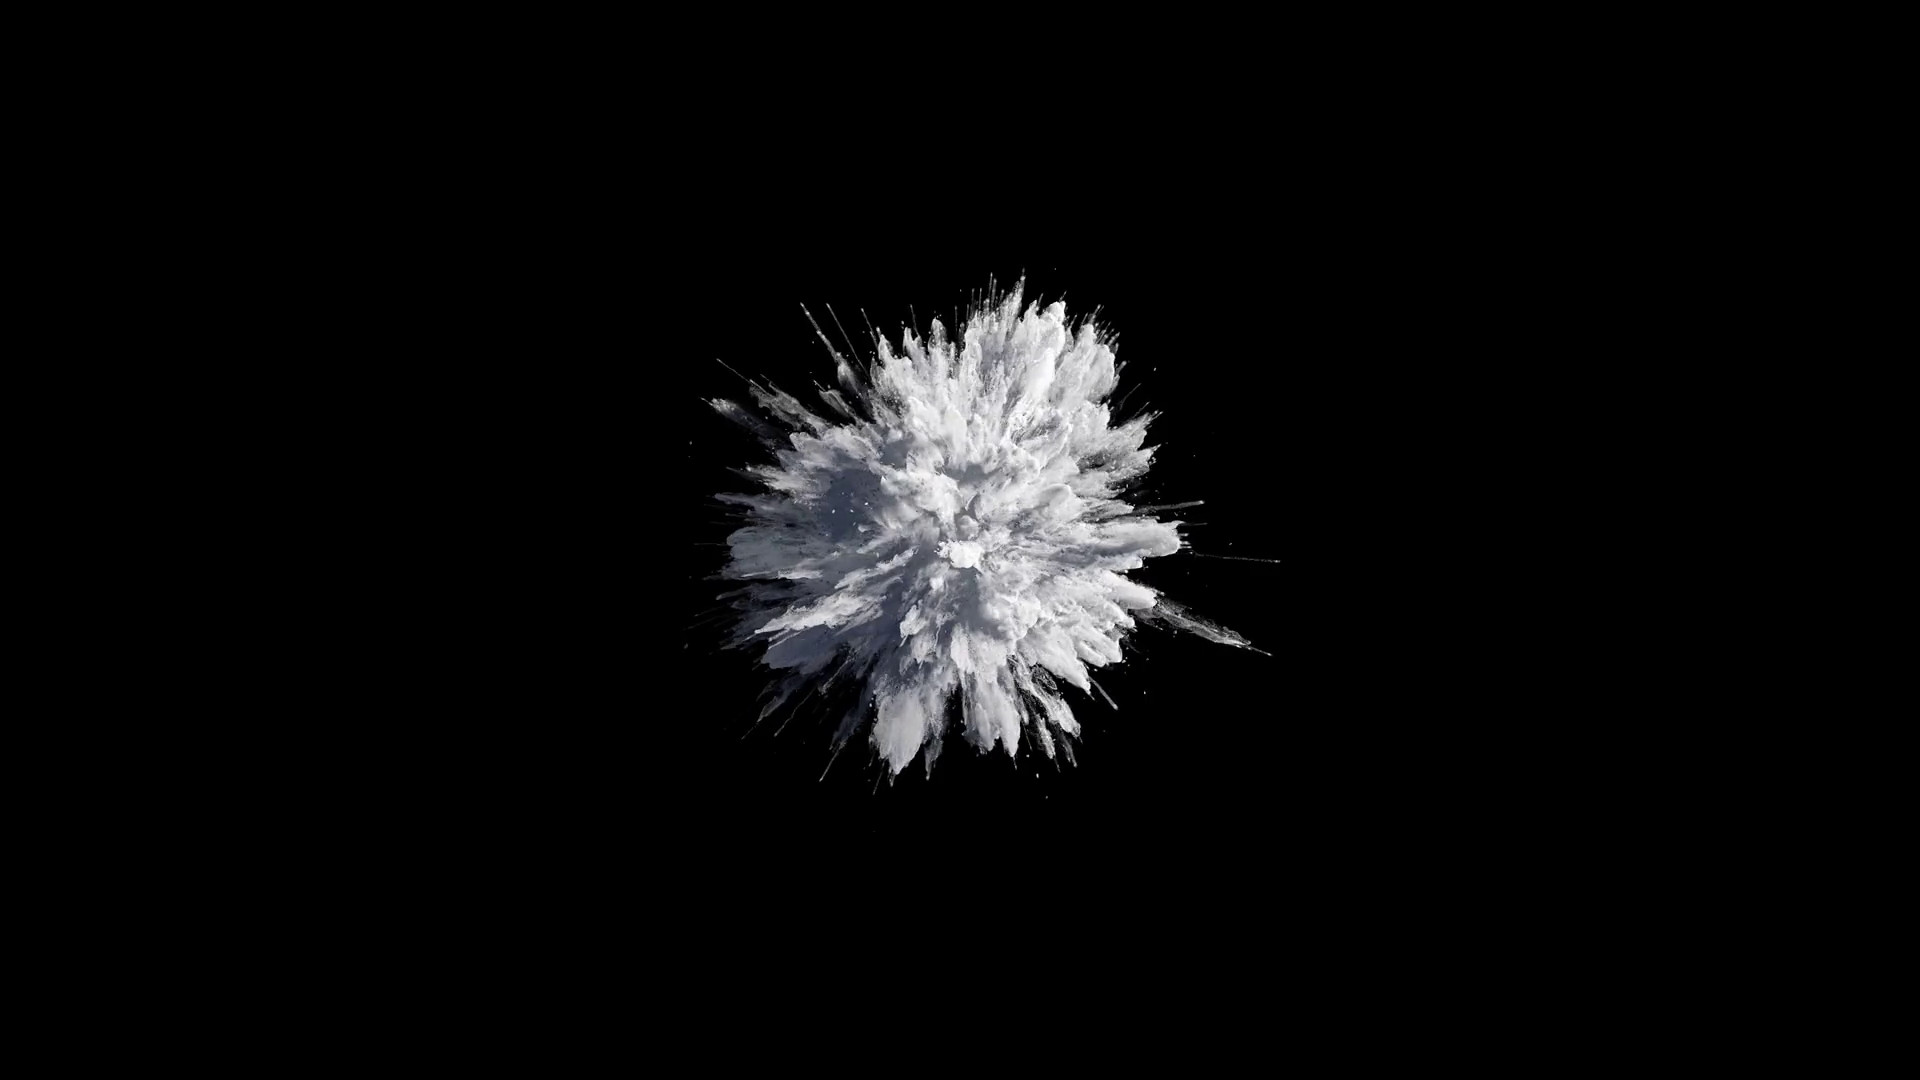 1920x1080 Cg animation of white powder explosion on black background. Slow motion  movement with acceleration in